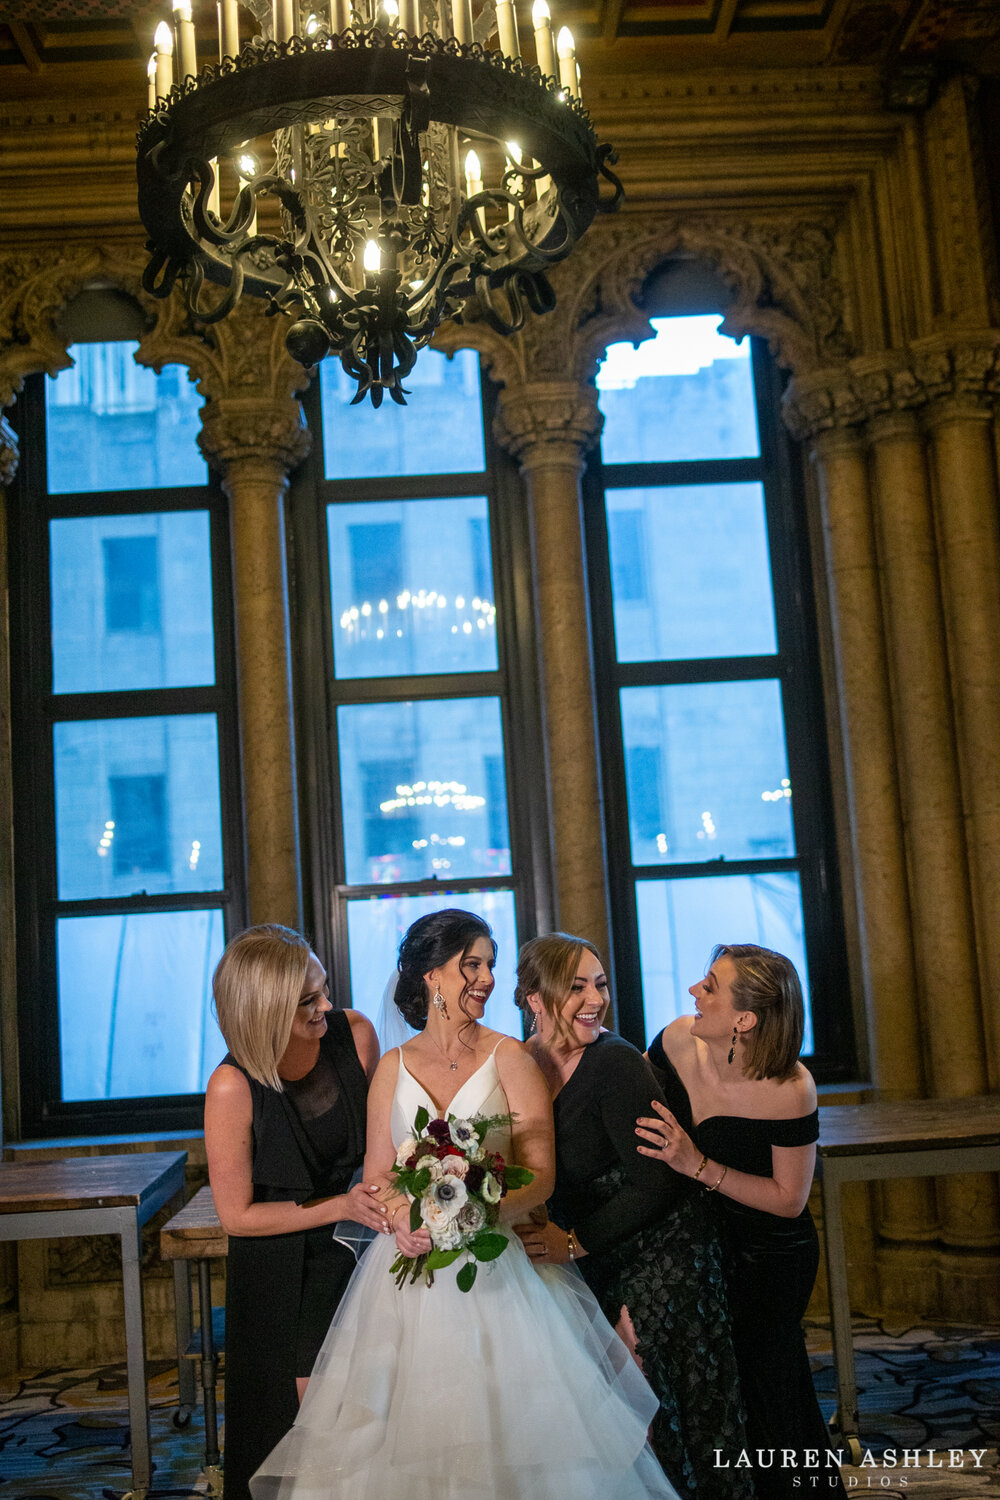 intercontinental-chicago-high-end-michigan-ave-magnificent-mile-wedding-chicago-wedding-photography-93.jpg